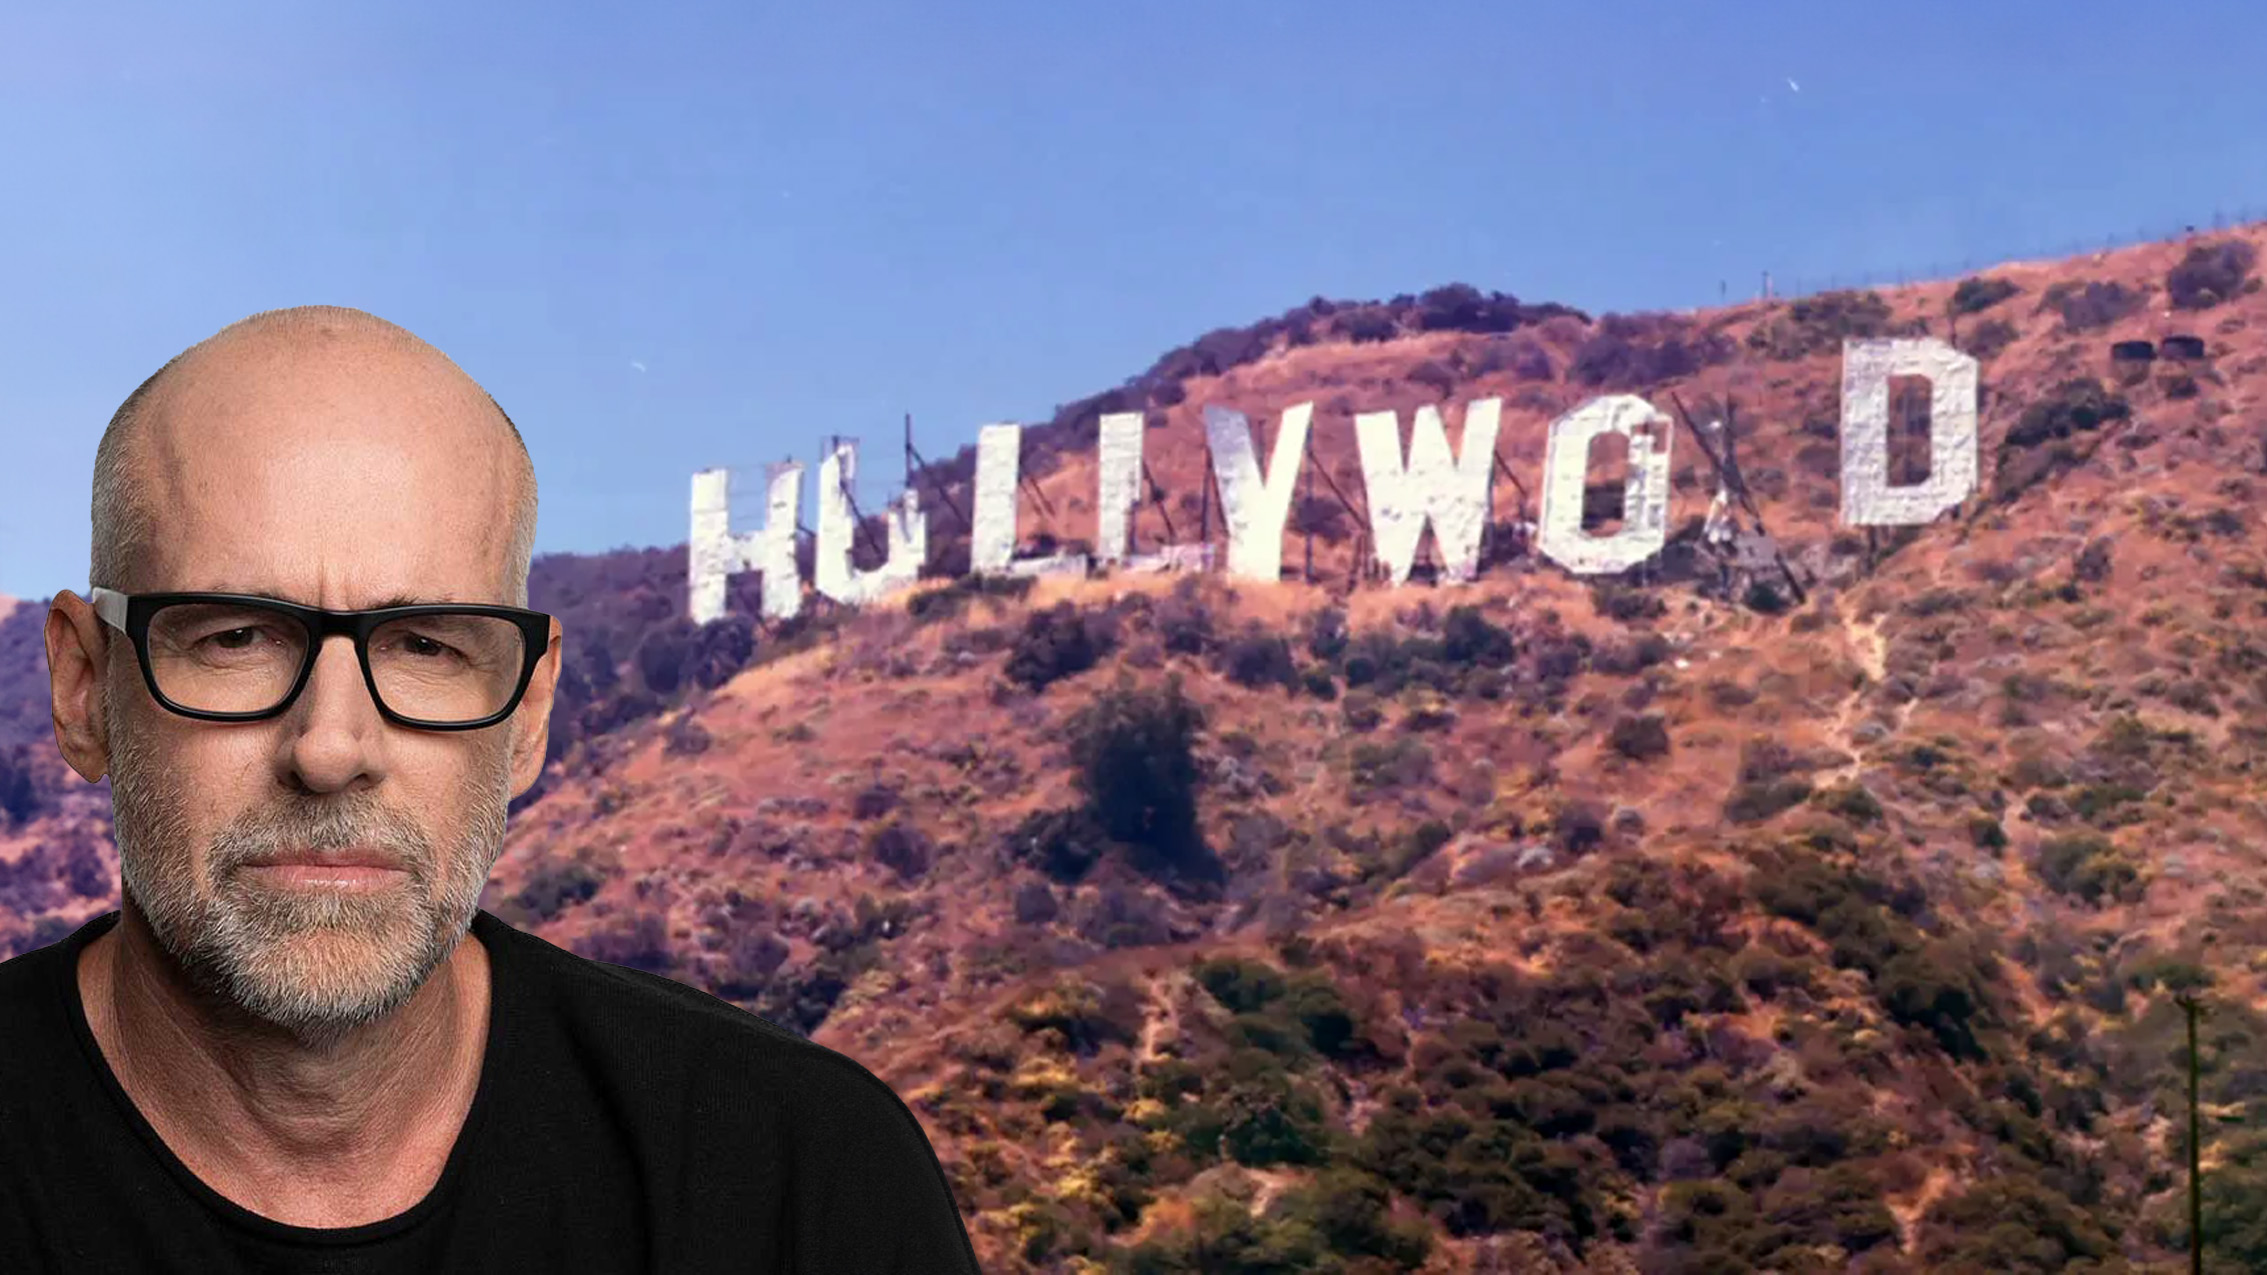 Hollywood is in decline – union strikes are partly to blame, says Scott Galloway